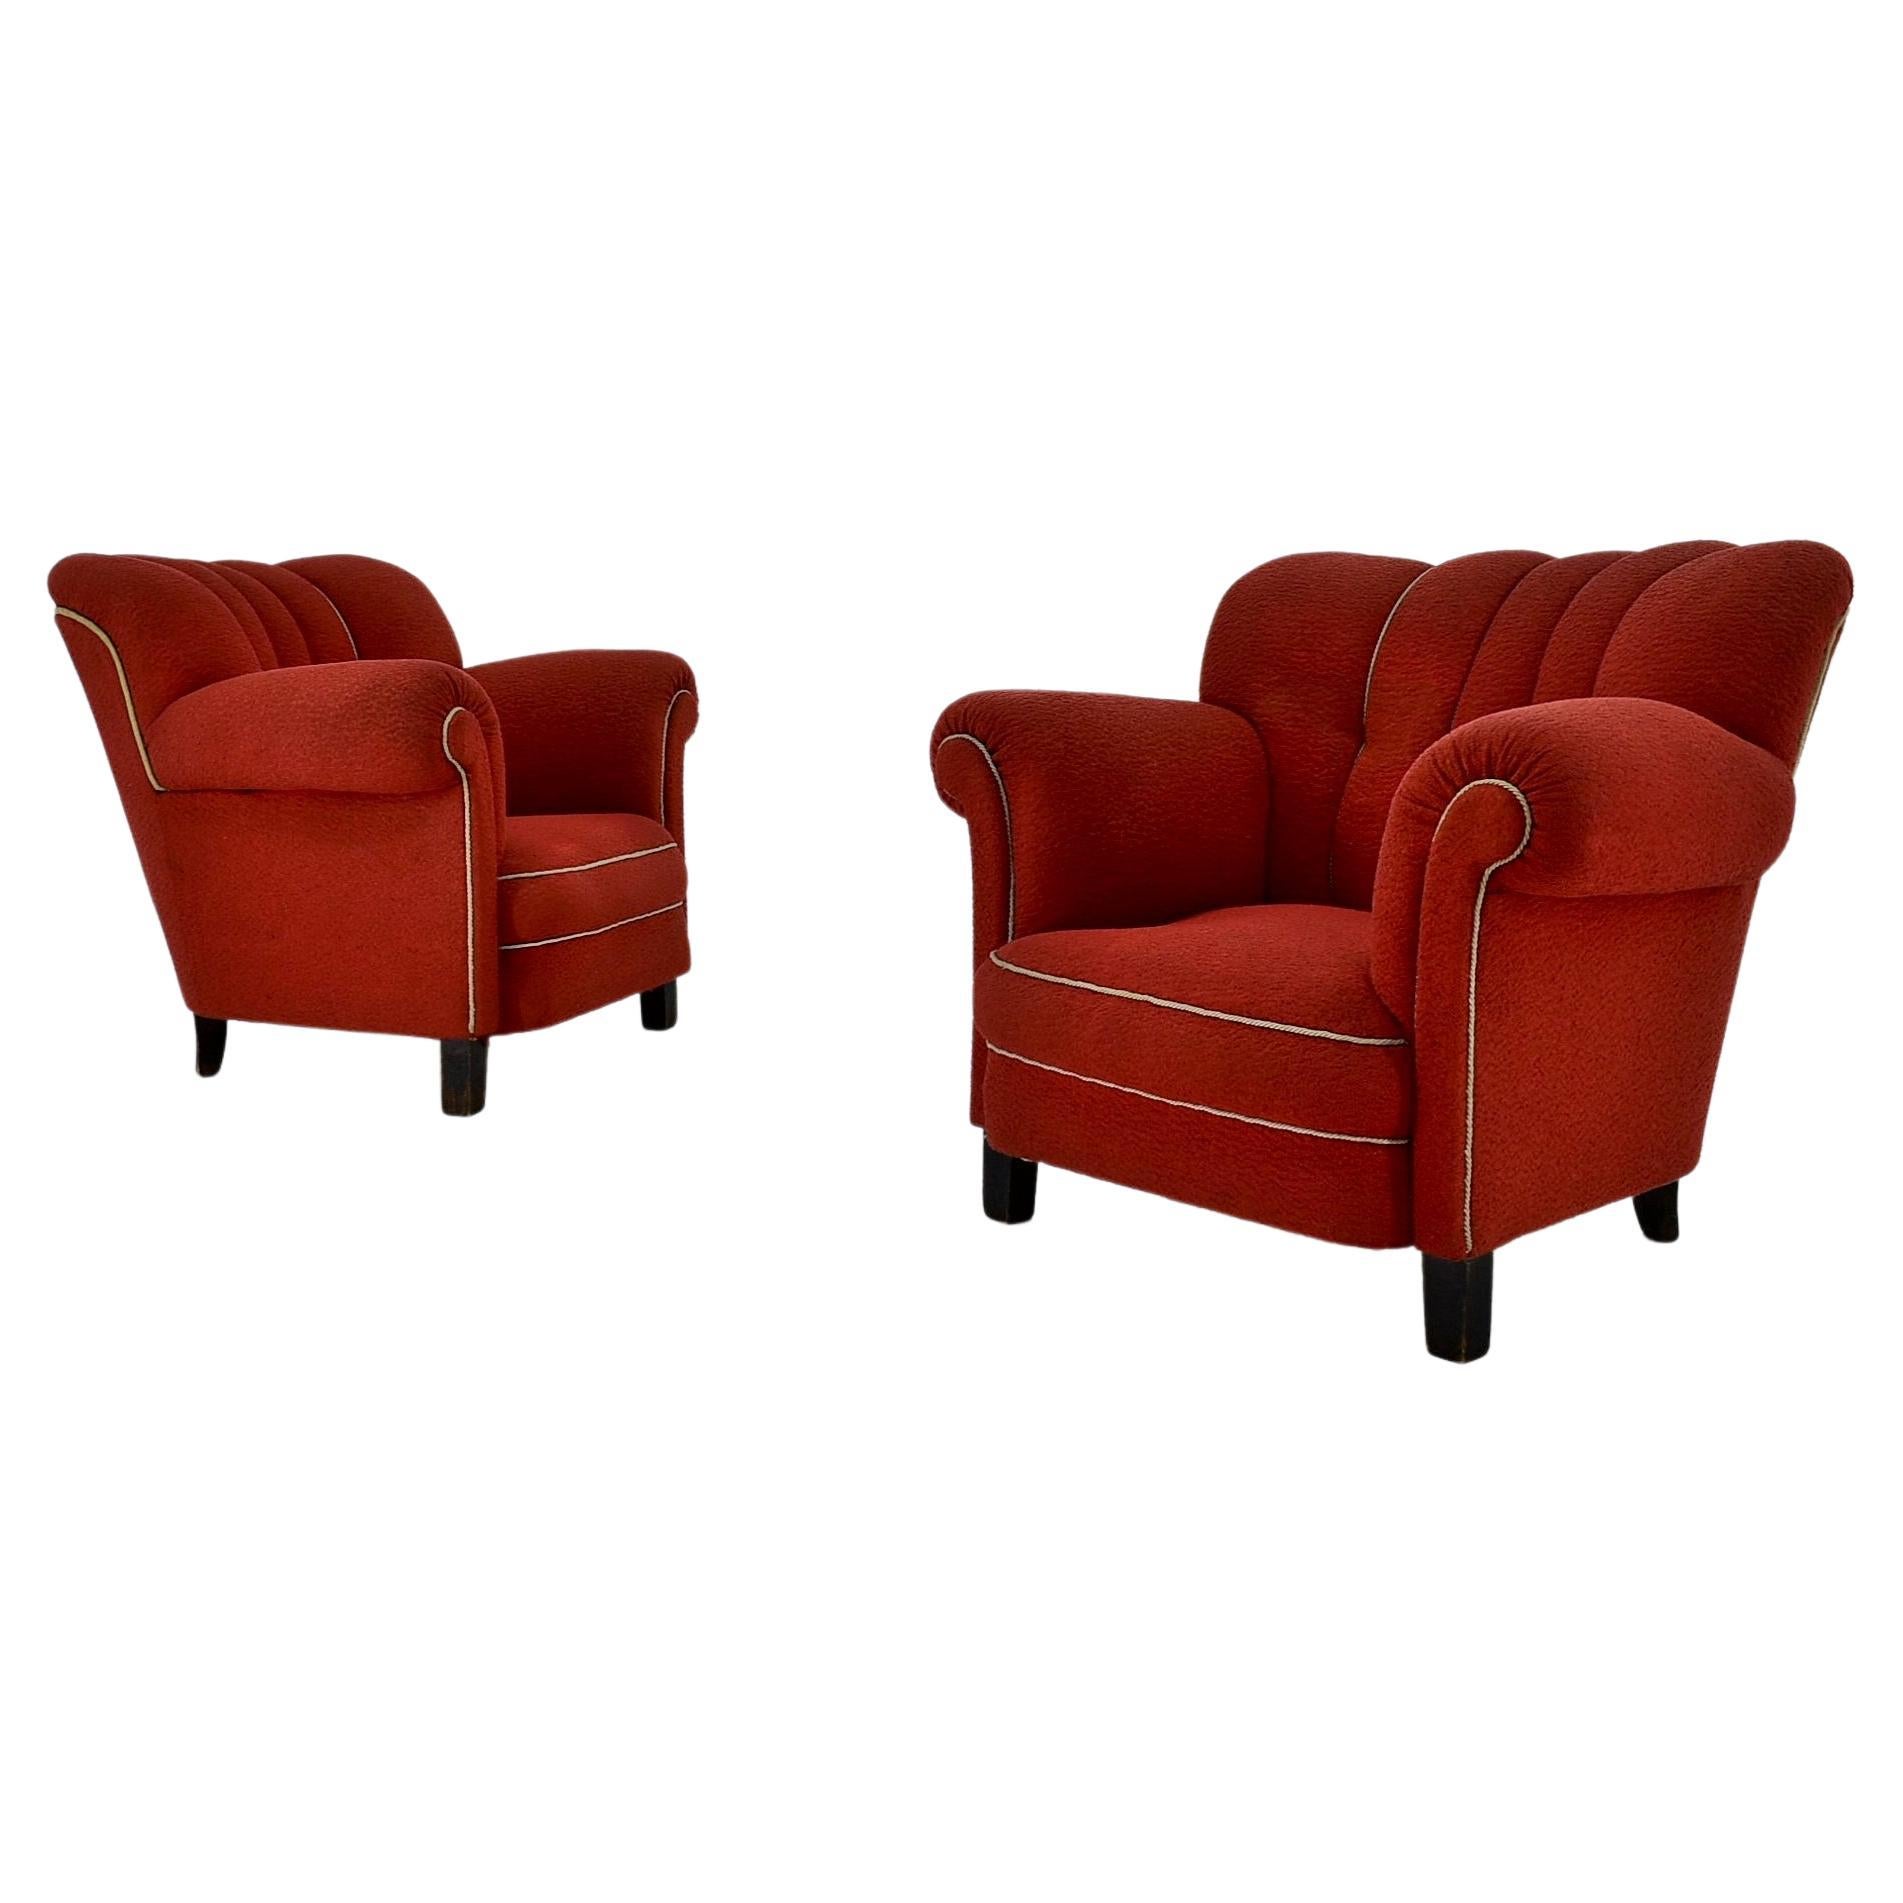 Set of Two Design Art Deco, Club Armchairs, 1935s